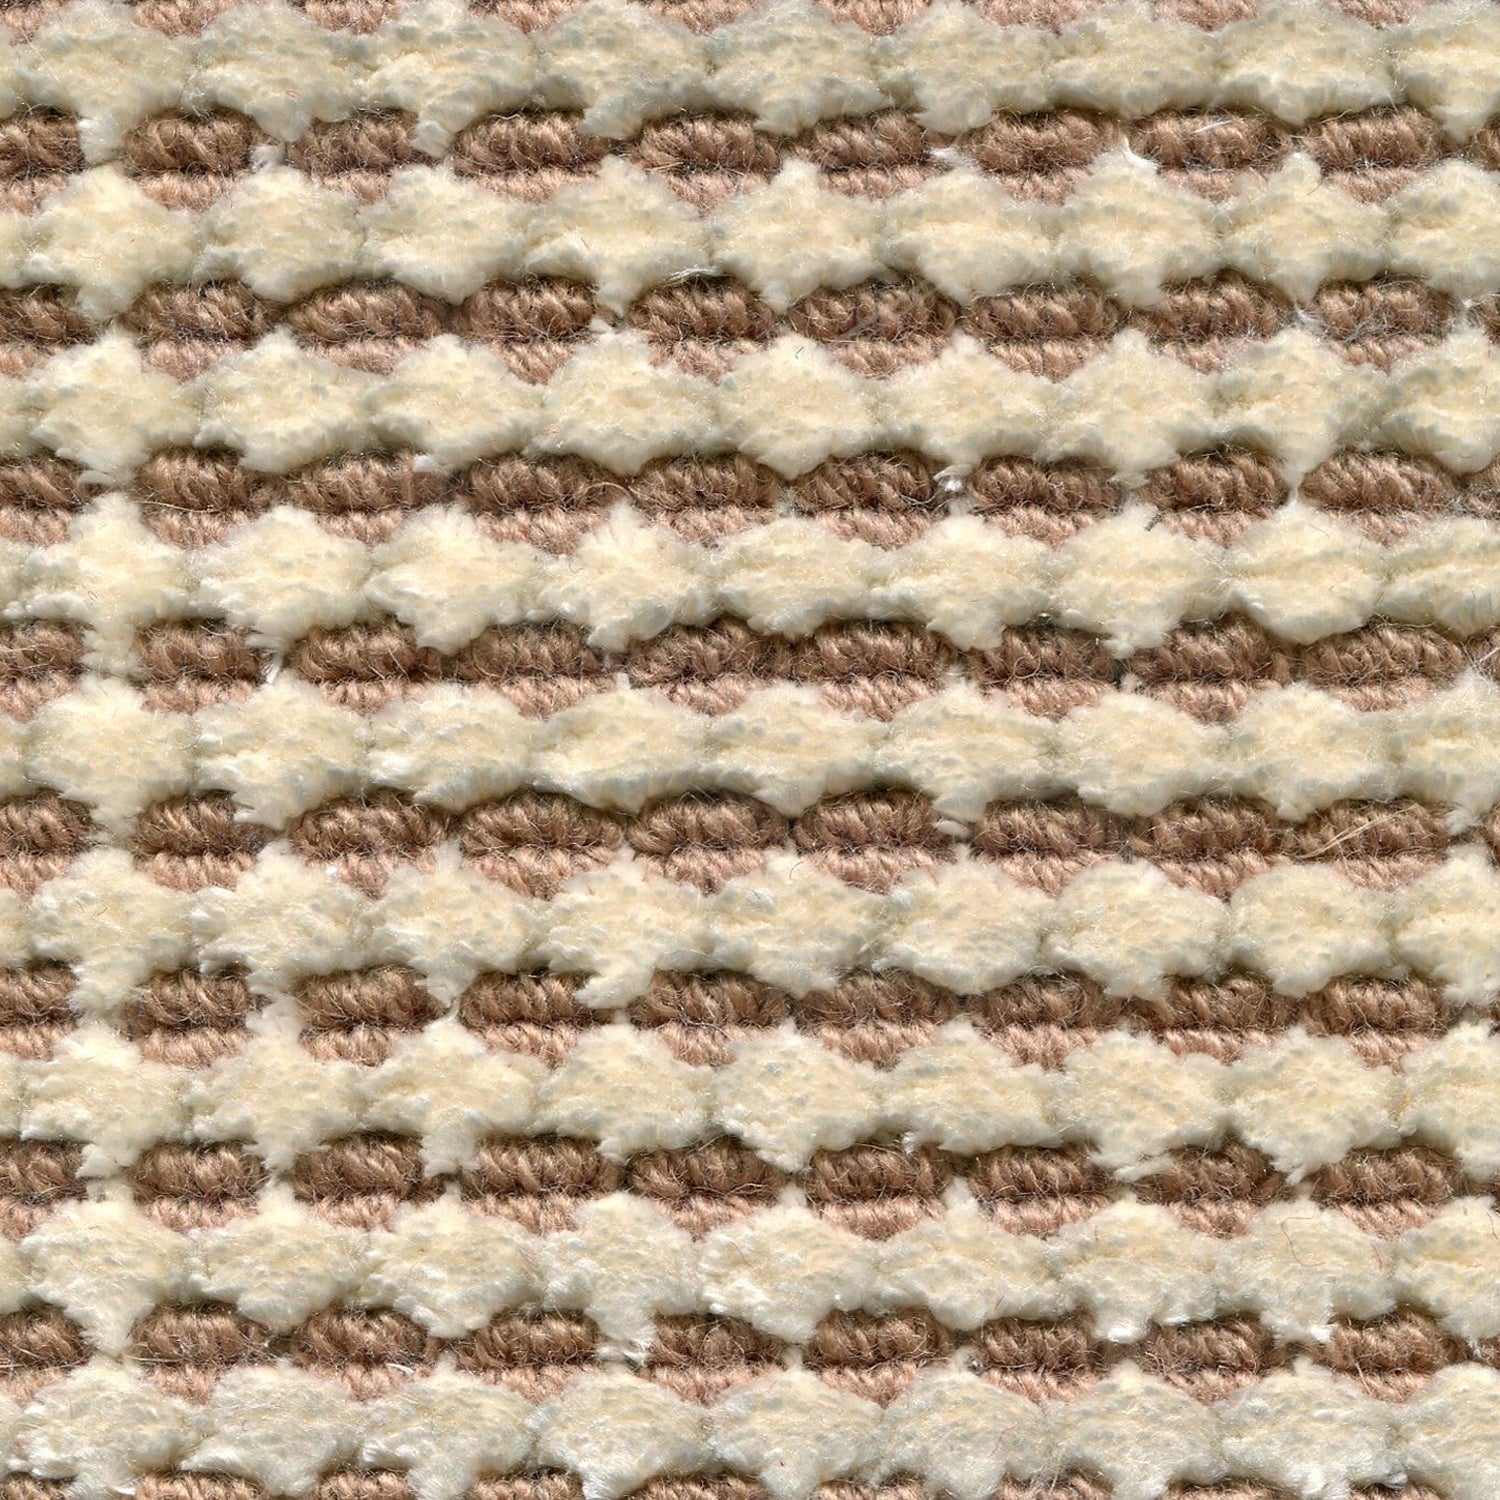 Wool-silk broadloom carpet swatch in a dimensional flat-and-tufted grid weave in cream and brown.